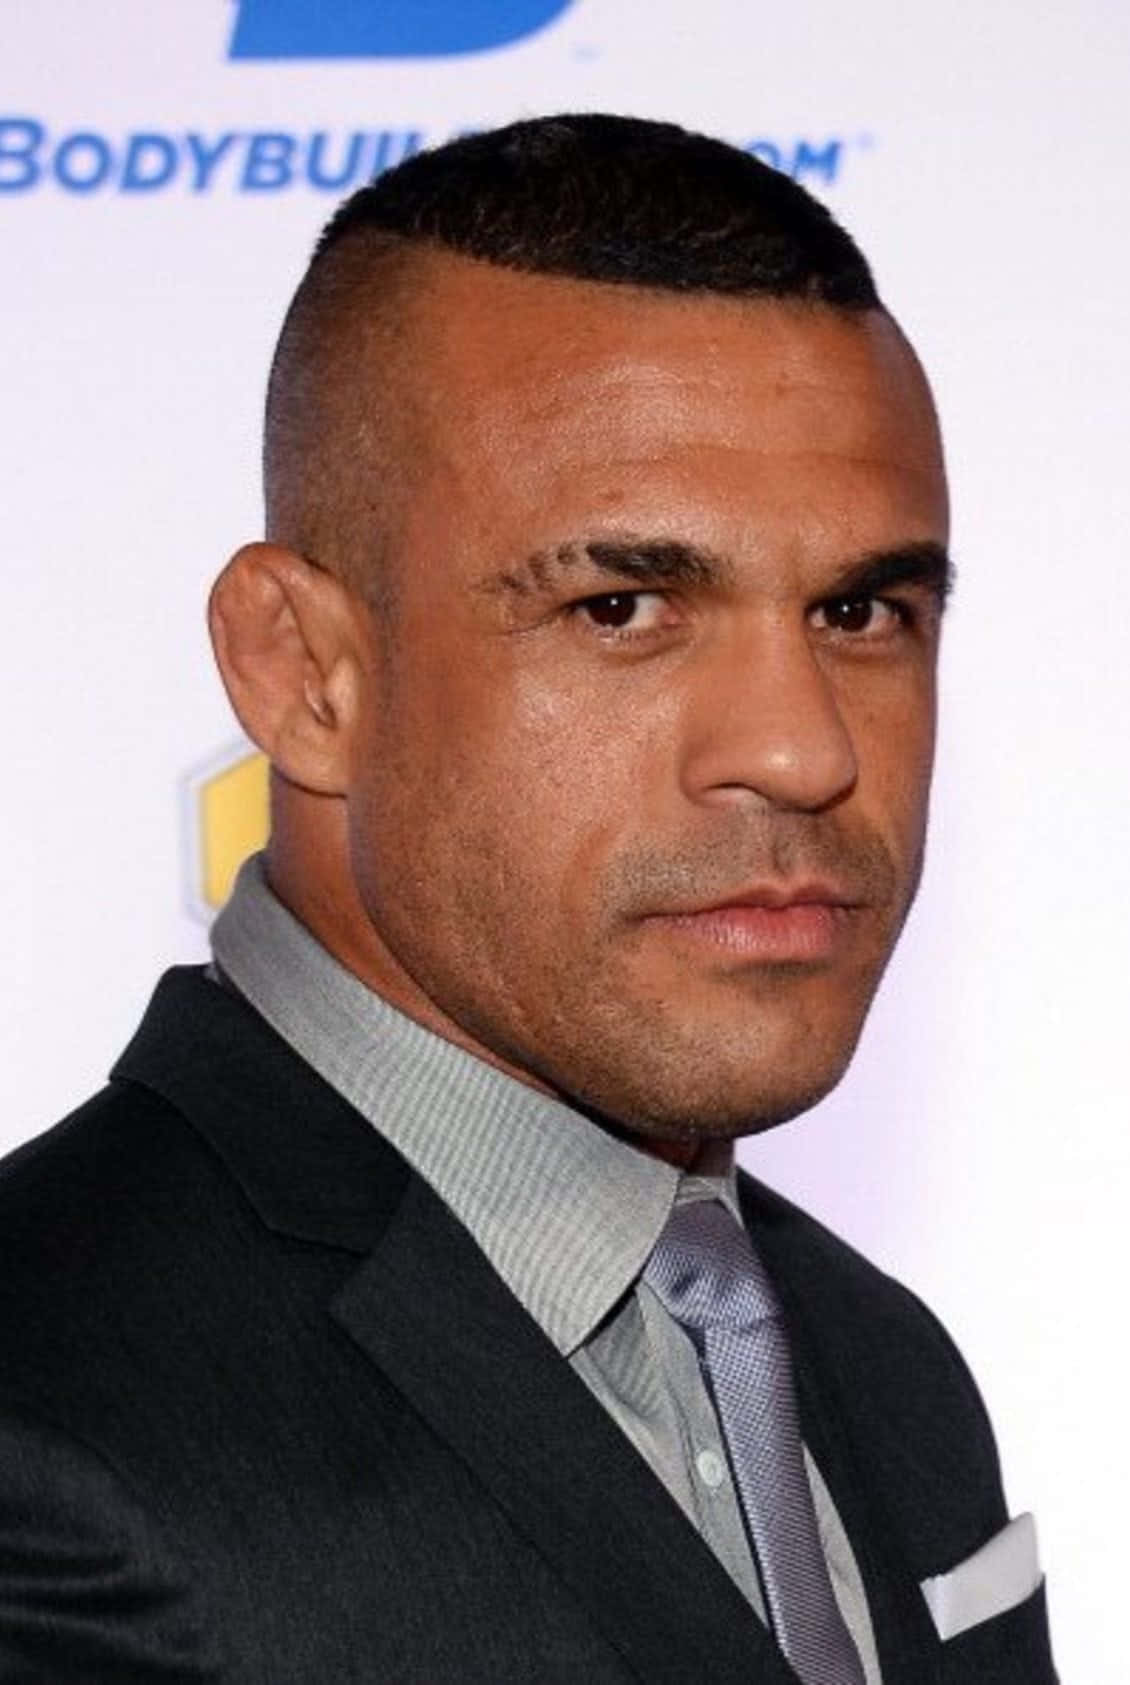 Vitorbelfort Fighters Only World Mixed Martial Arts Awards - Vitor Belfort Fighters Only Världsmästerskapen I Mixed Martial Arts Awards. Wallpaper